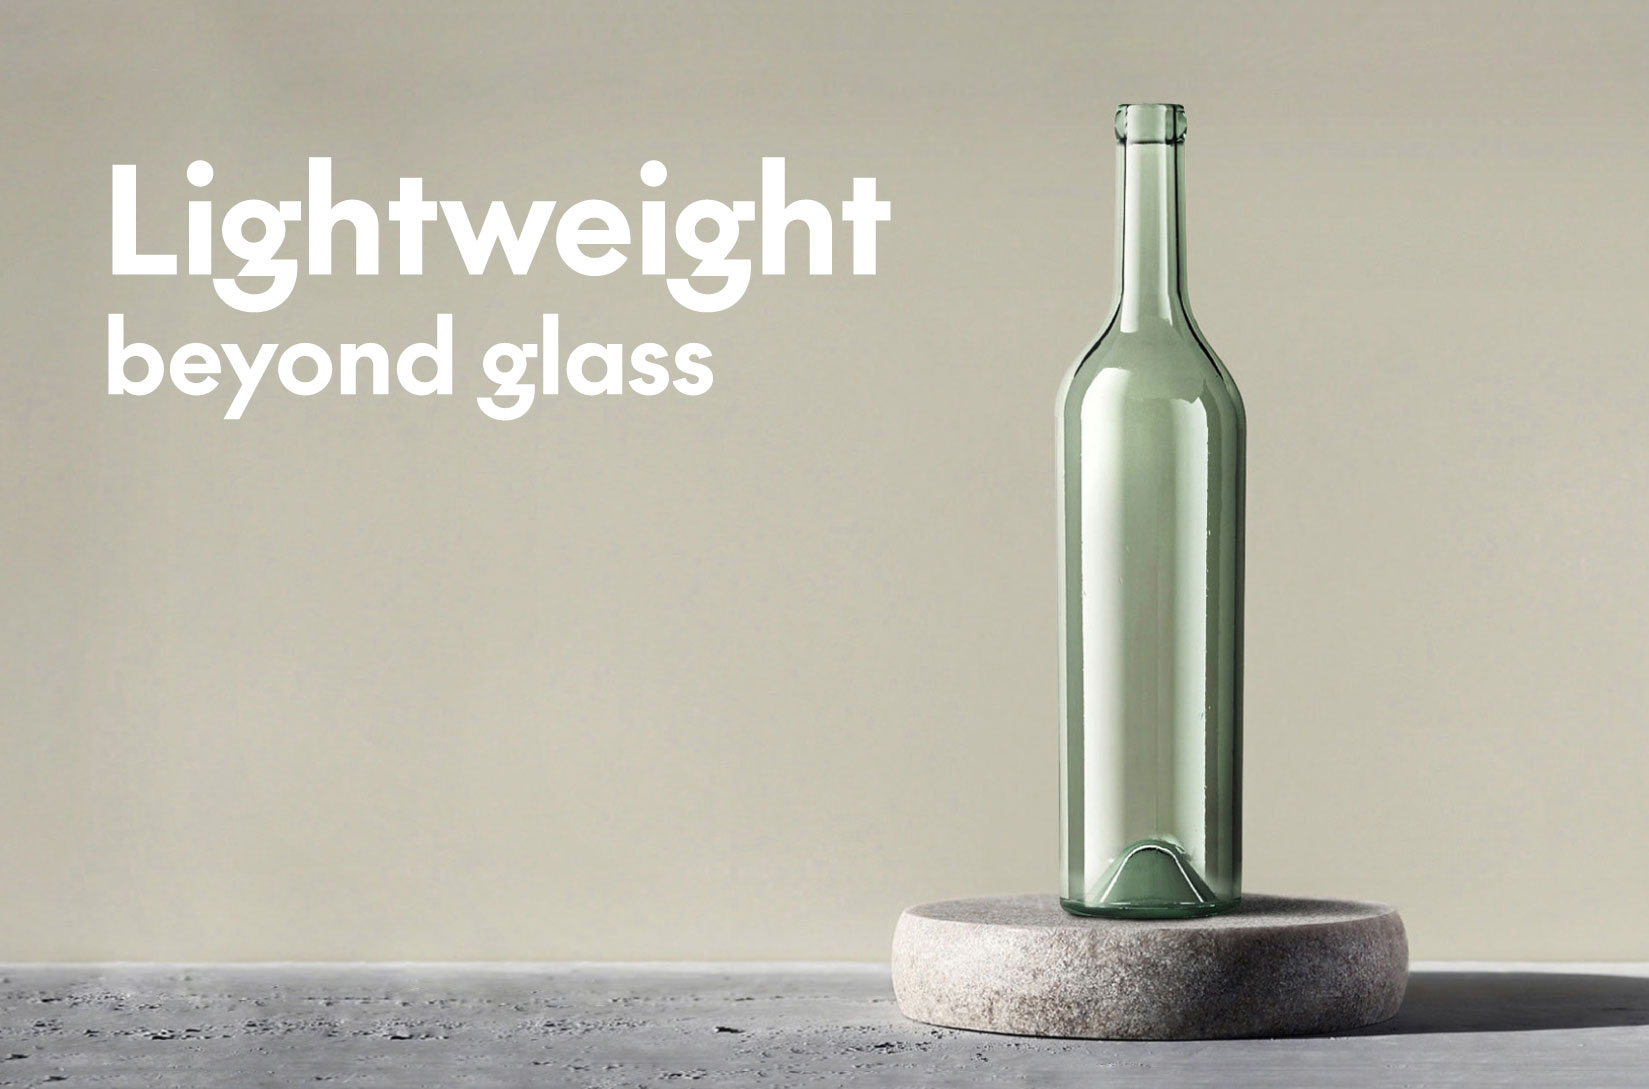  When an asymmetrical bottle is the most sustainable choice